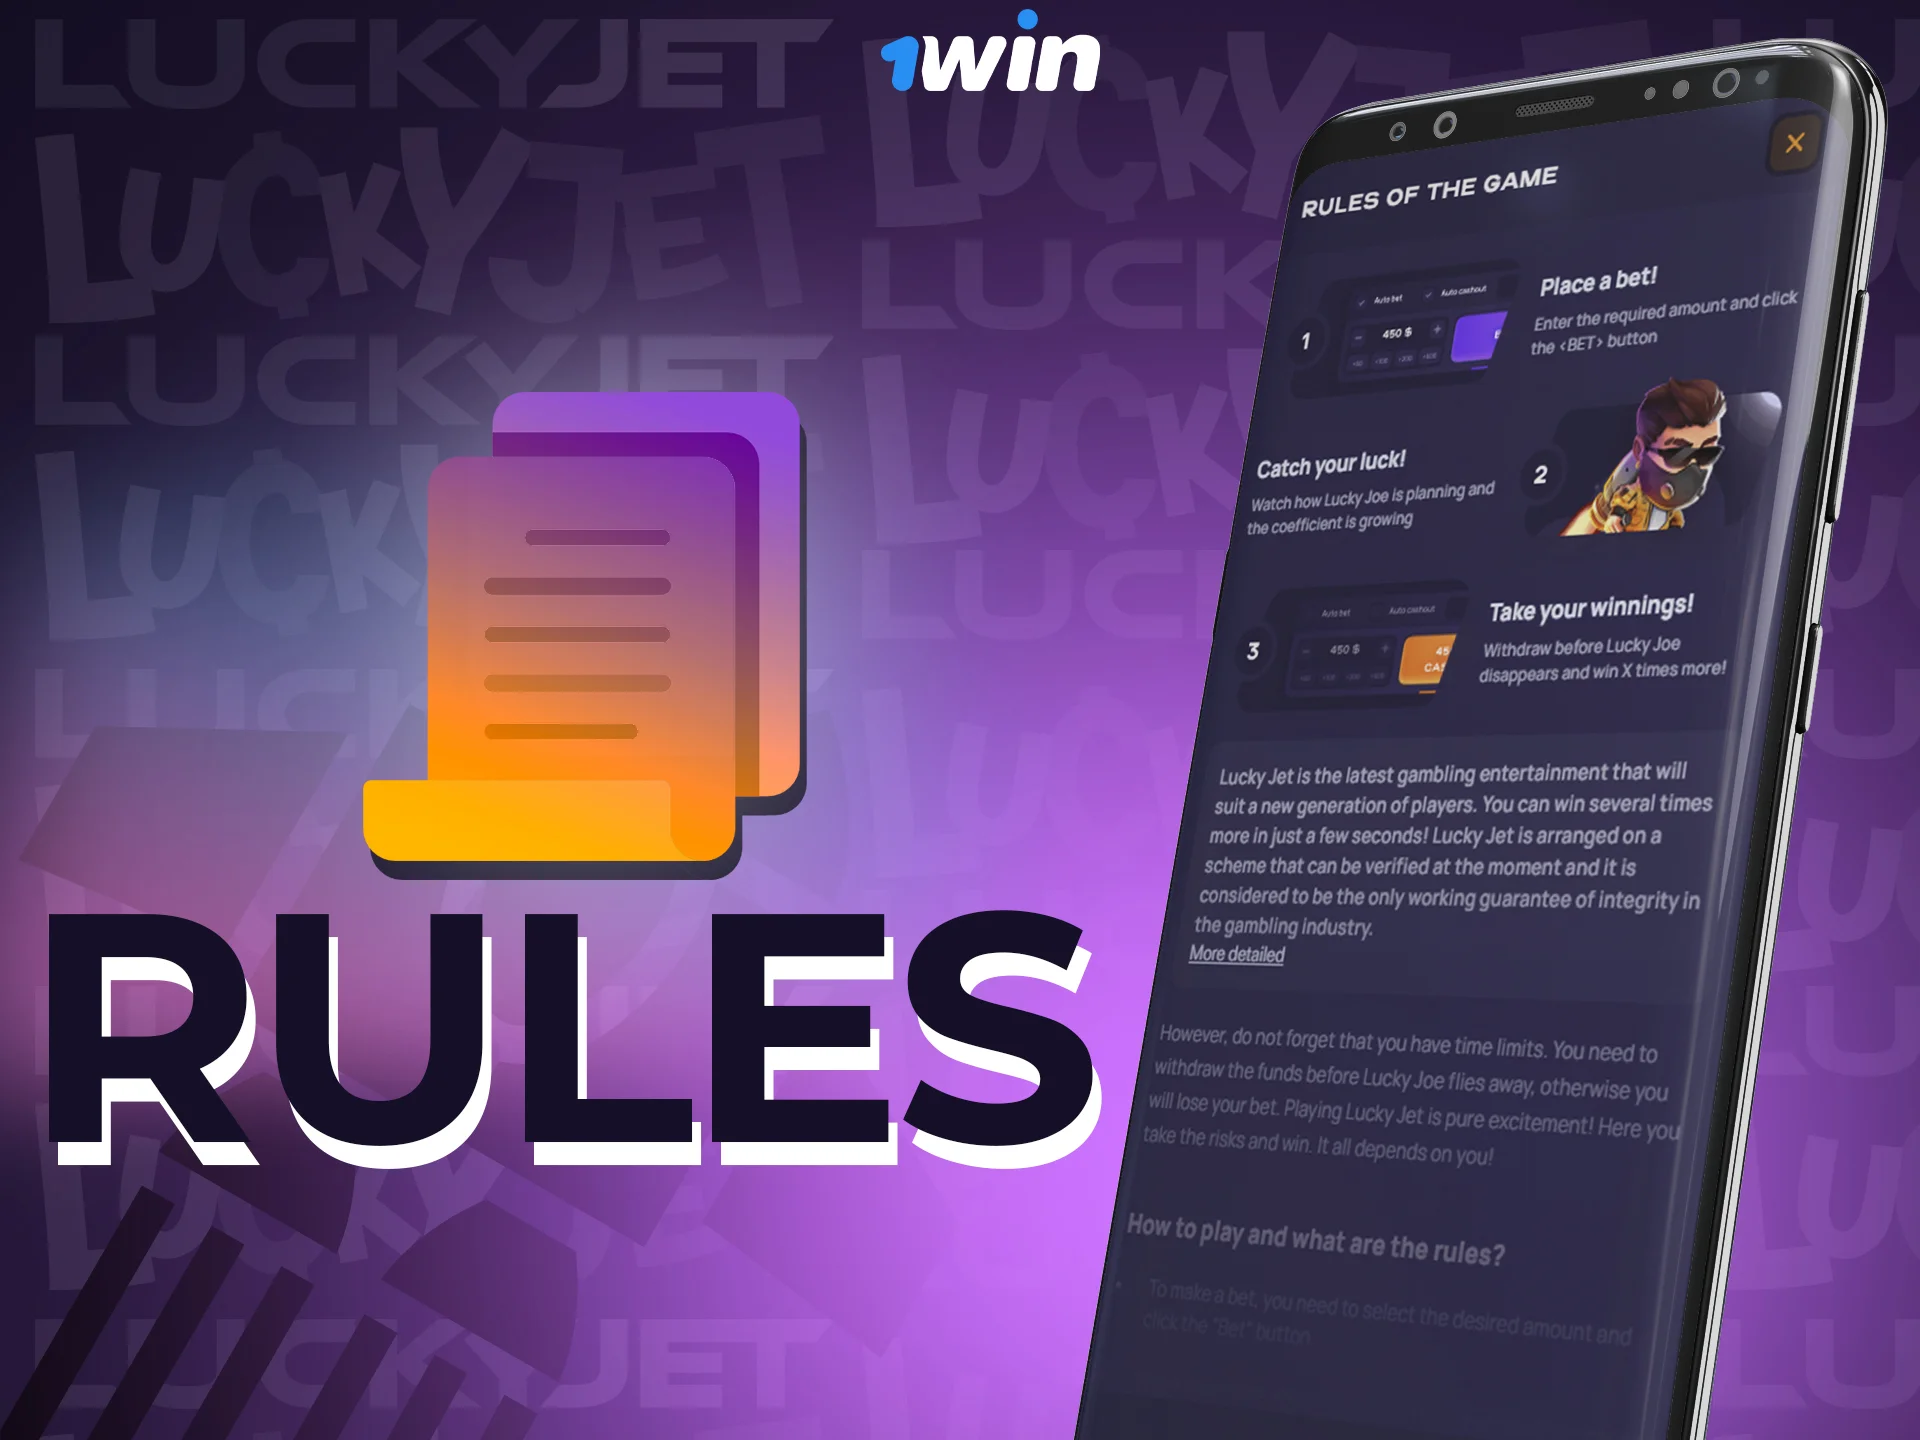 Get familiar with these simple rules of the Lucky Jet app at 1win.